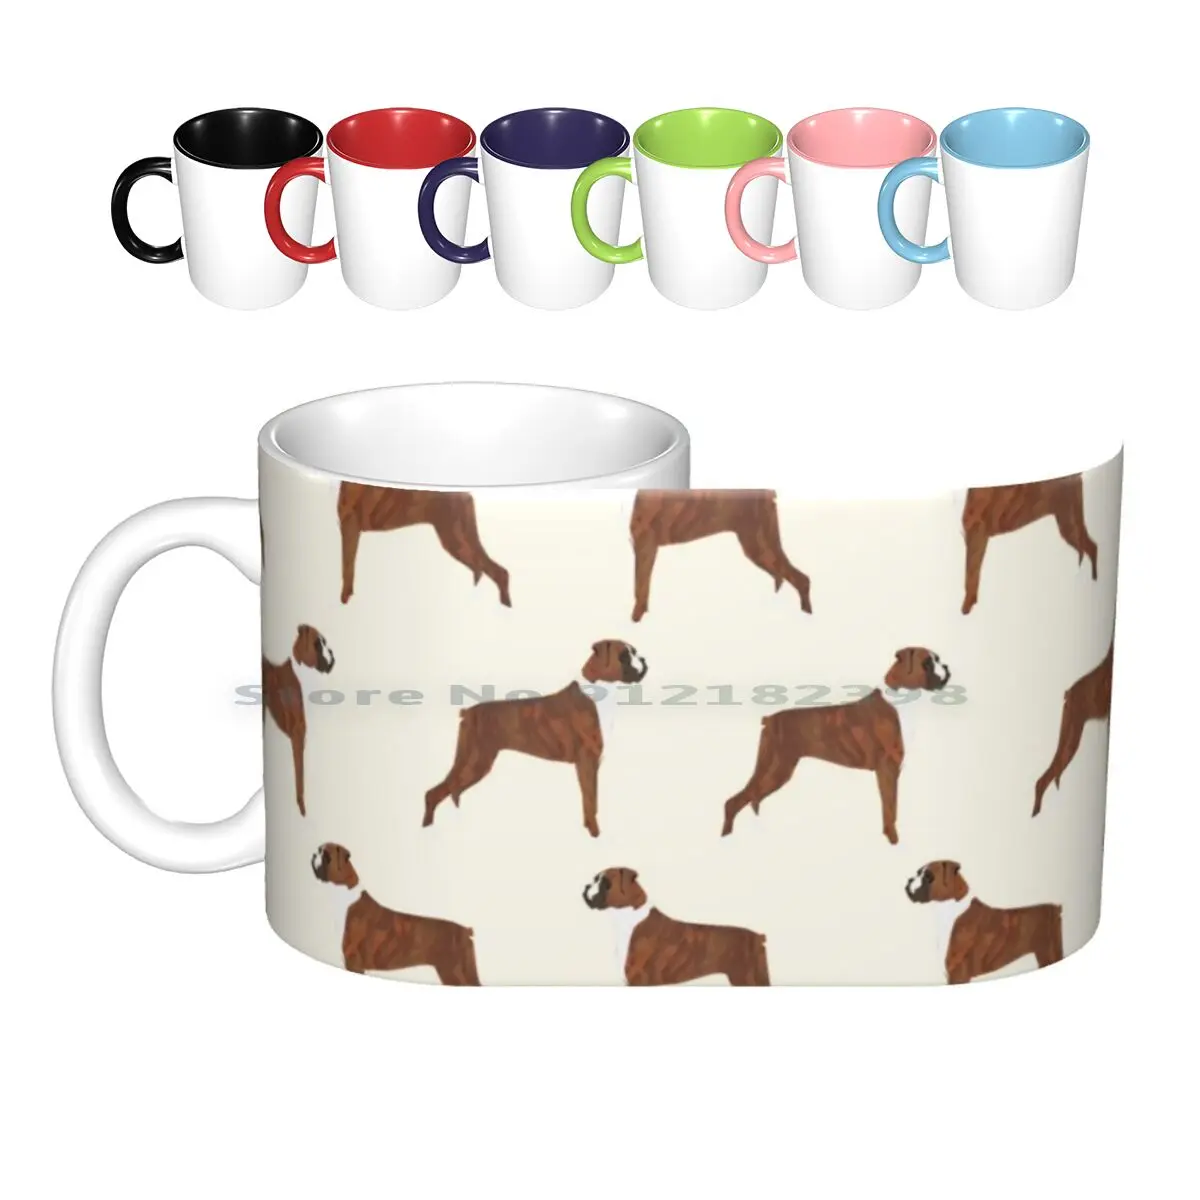 

Boxer Dog Pattern Dog Lover Pet Portraits Boxers Dog Breed By Pet Friendly By Petfriendly Ceramic Mugs Coffee Cups Milk Tea Mug